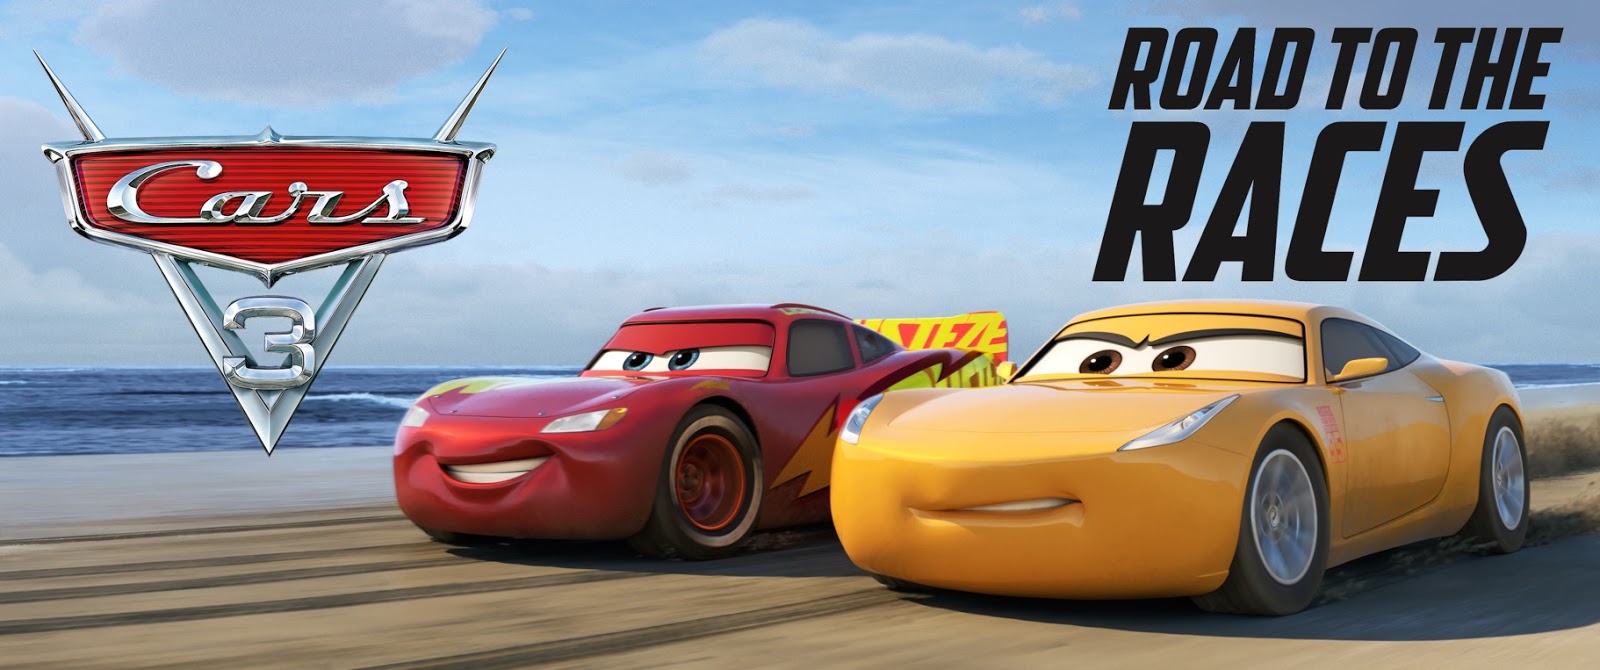 Cars 3 Road To The Races Tour Brings Life Sized Lightning Mcqueen Cruz Ramirez Jackson Storm To A City Near You Updated Pixar Post